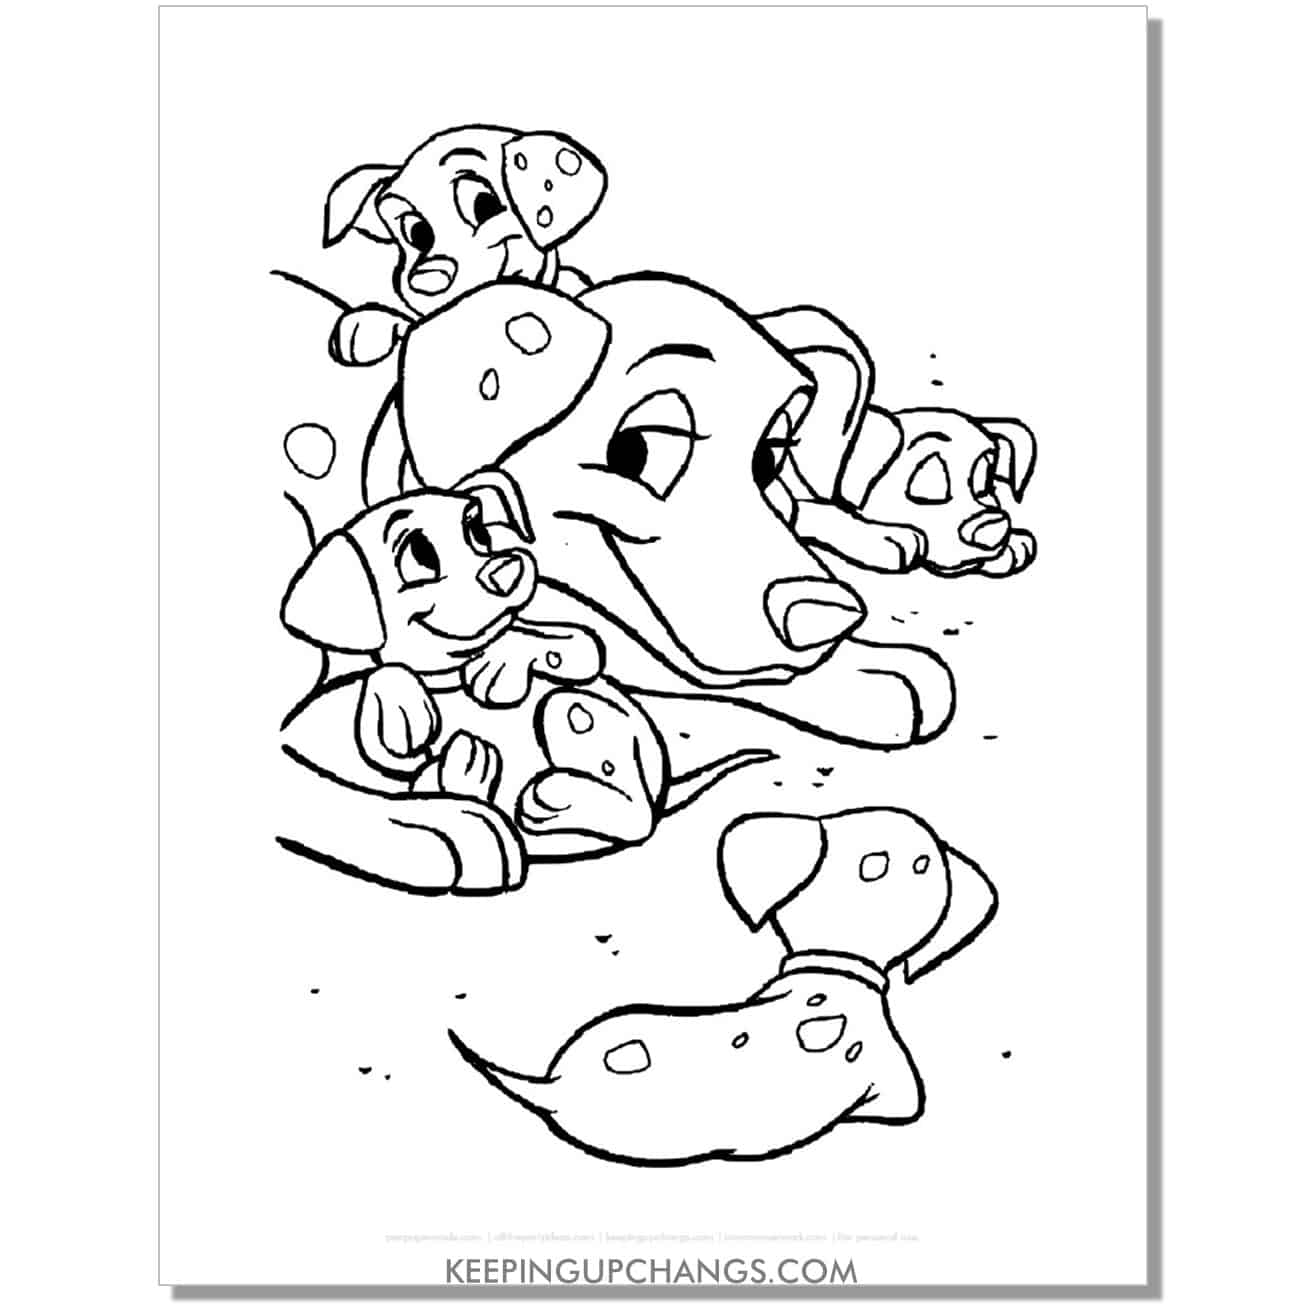 free perdita with newly born pups 101 dalmations coloring page, sheet.